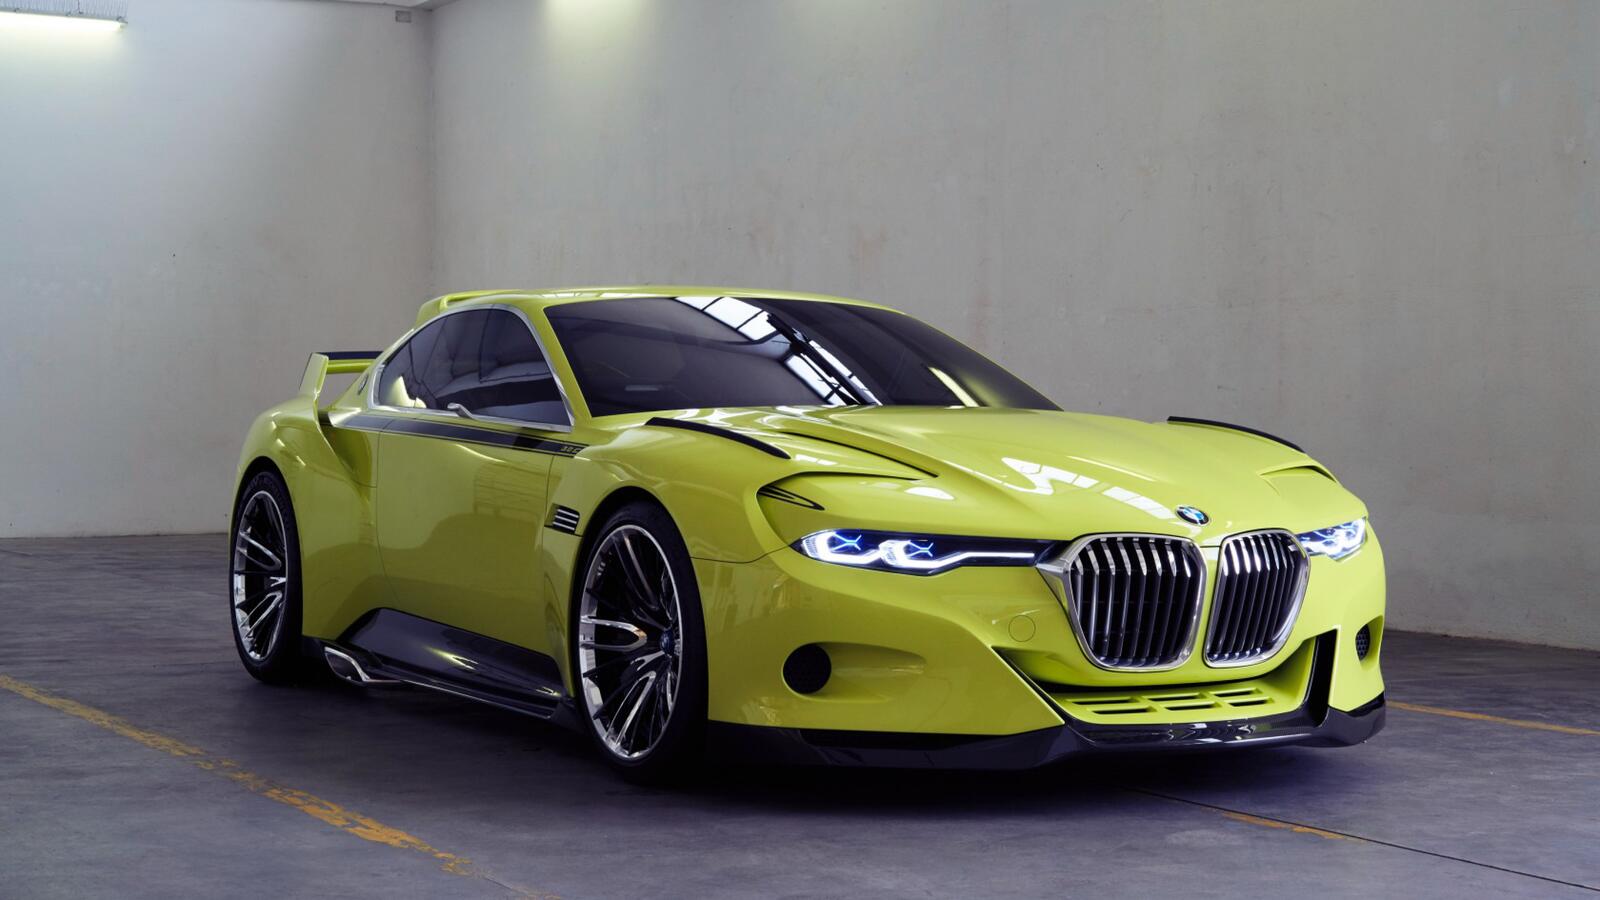 Free photo Picture of a bmw csl in lettuce color.